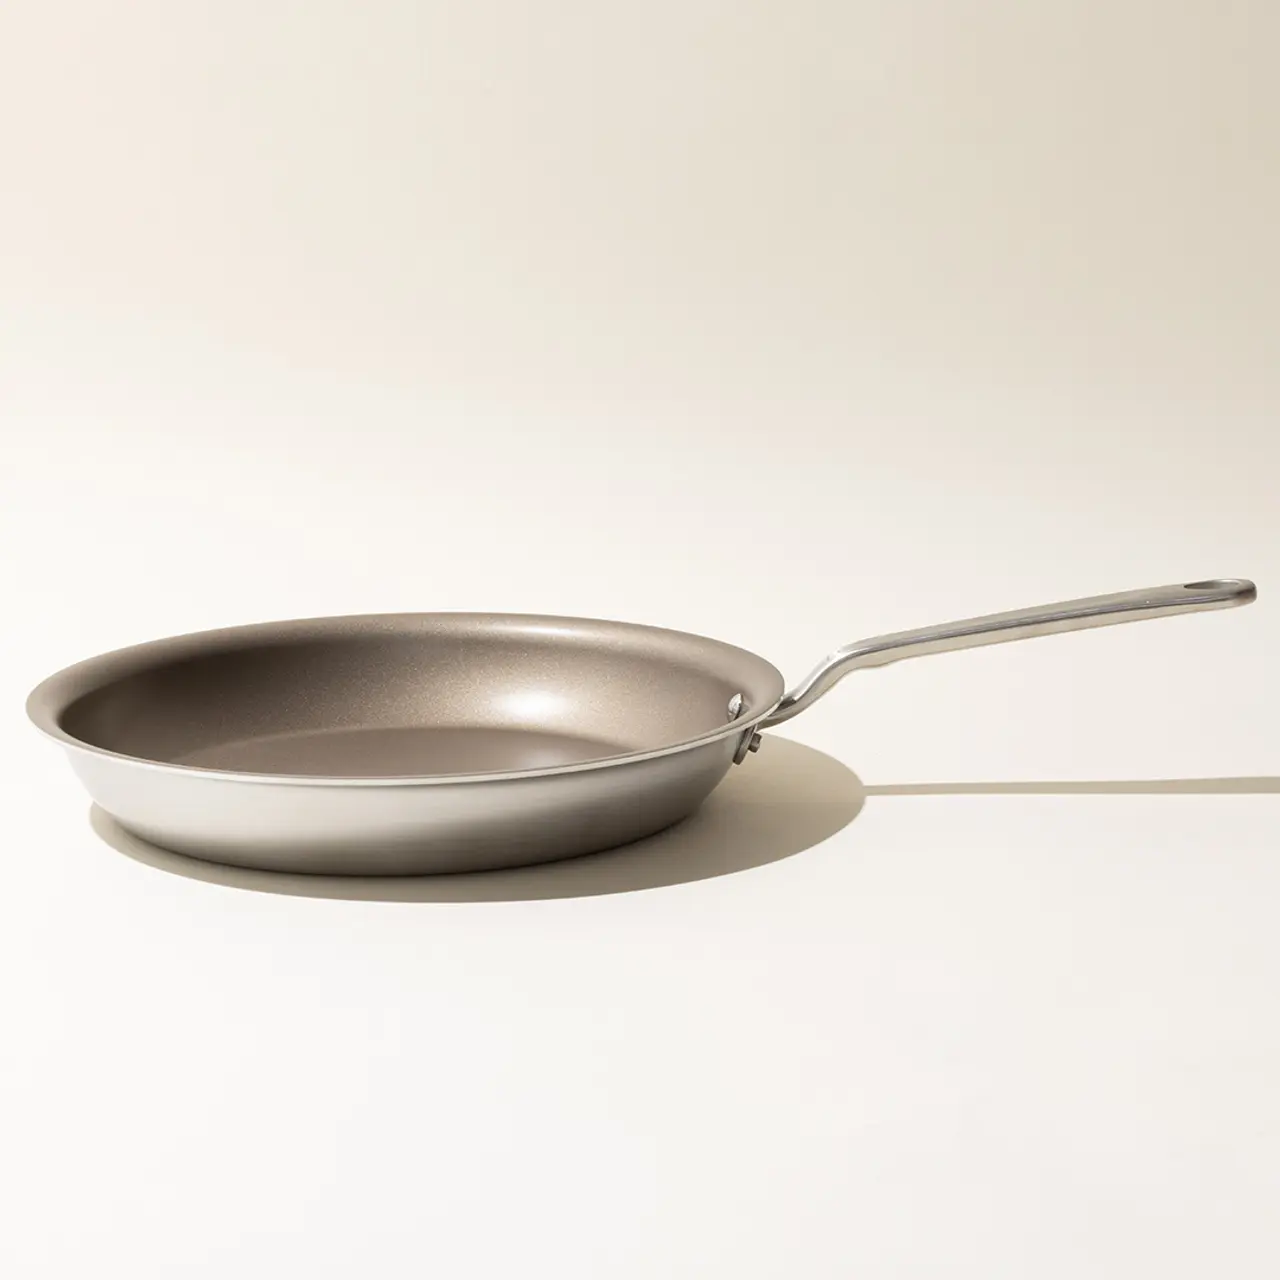 A non-stick frying pan with a long handle is placed on a neutral background, casting a slight shadow.